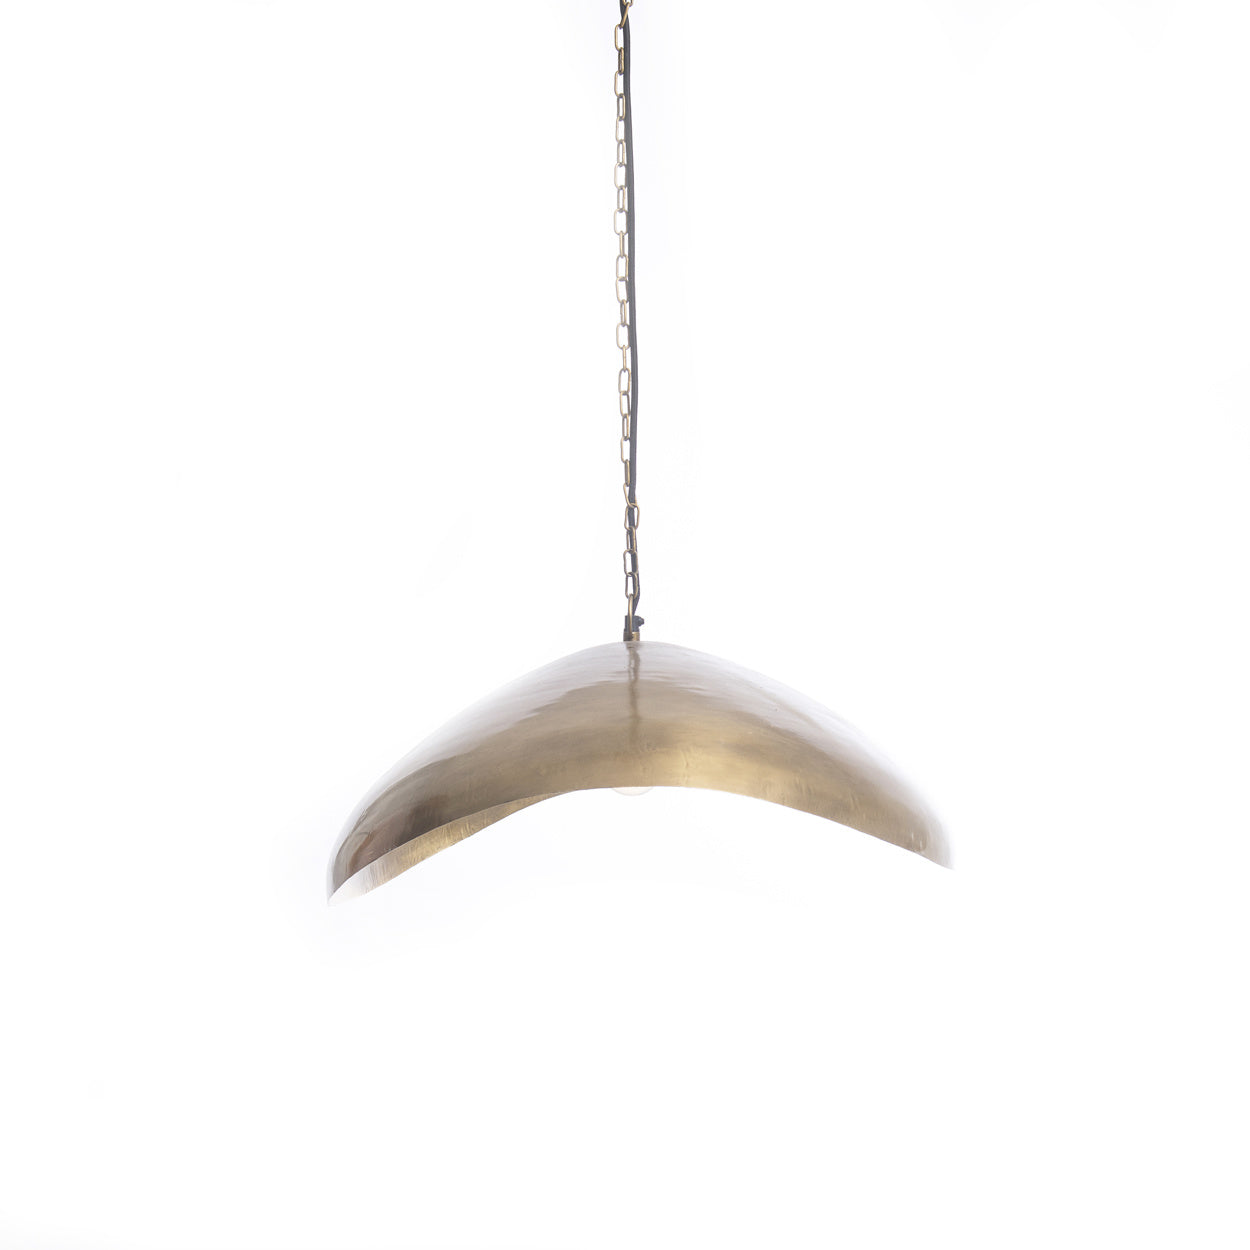 Fortune Cookie Hanglamp Messing L